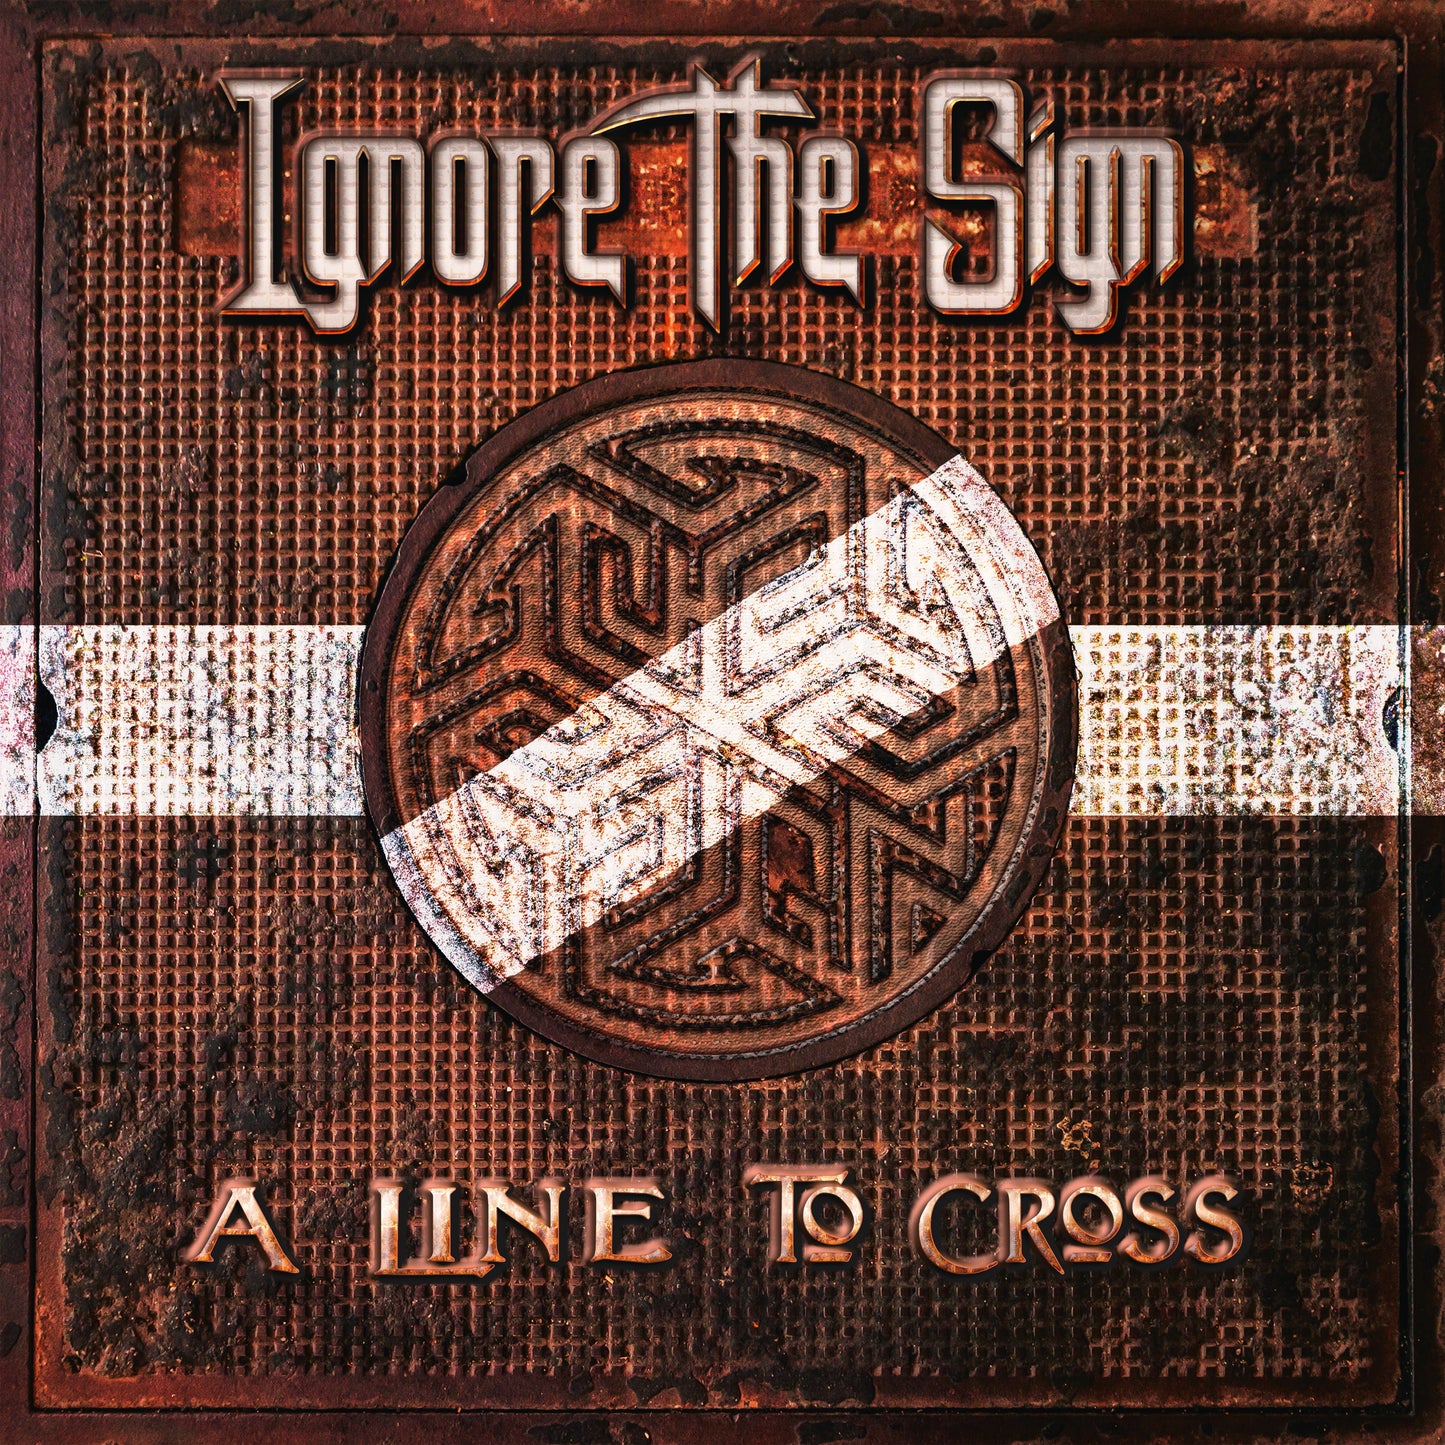 Ignore The Sign "A Line To Cross" LP